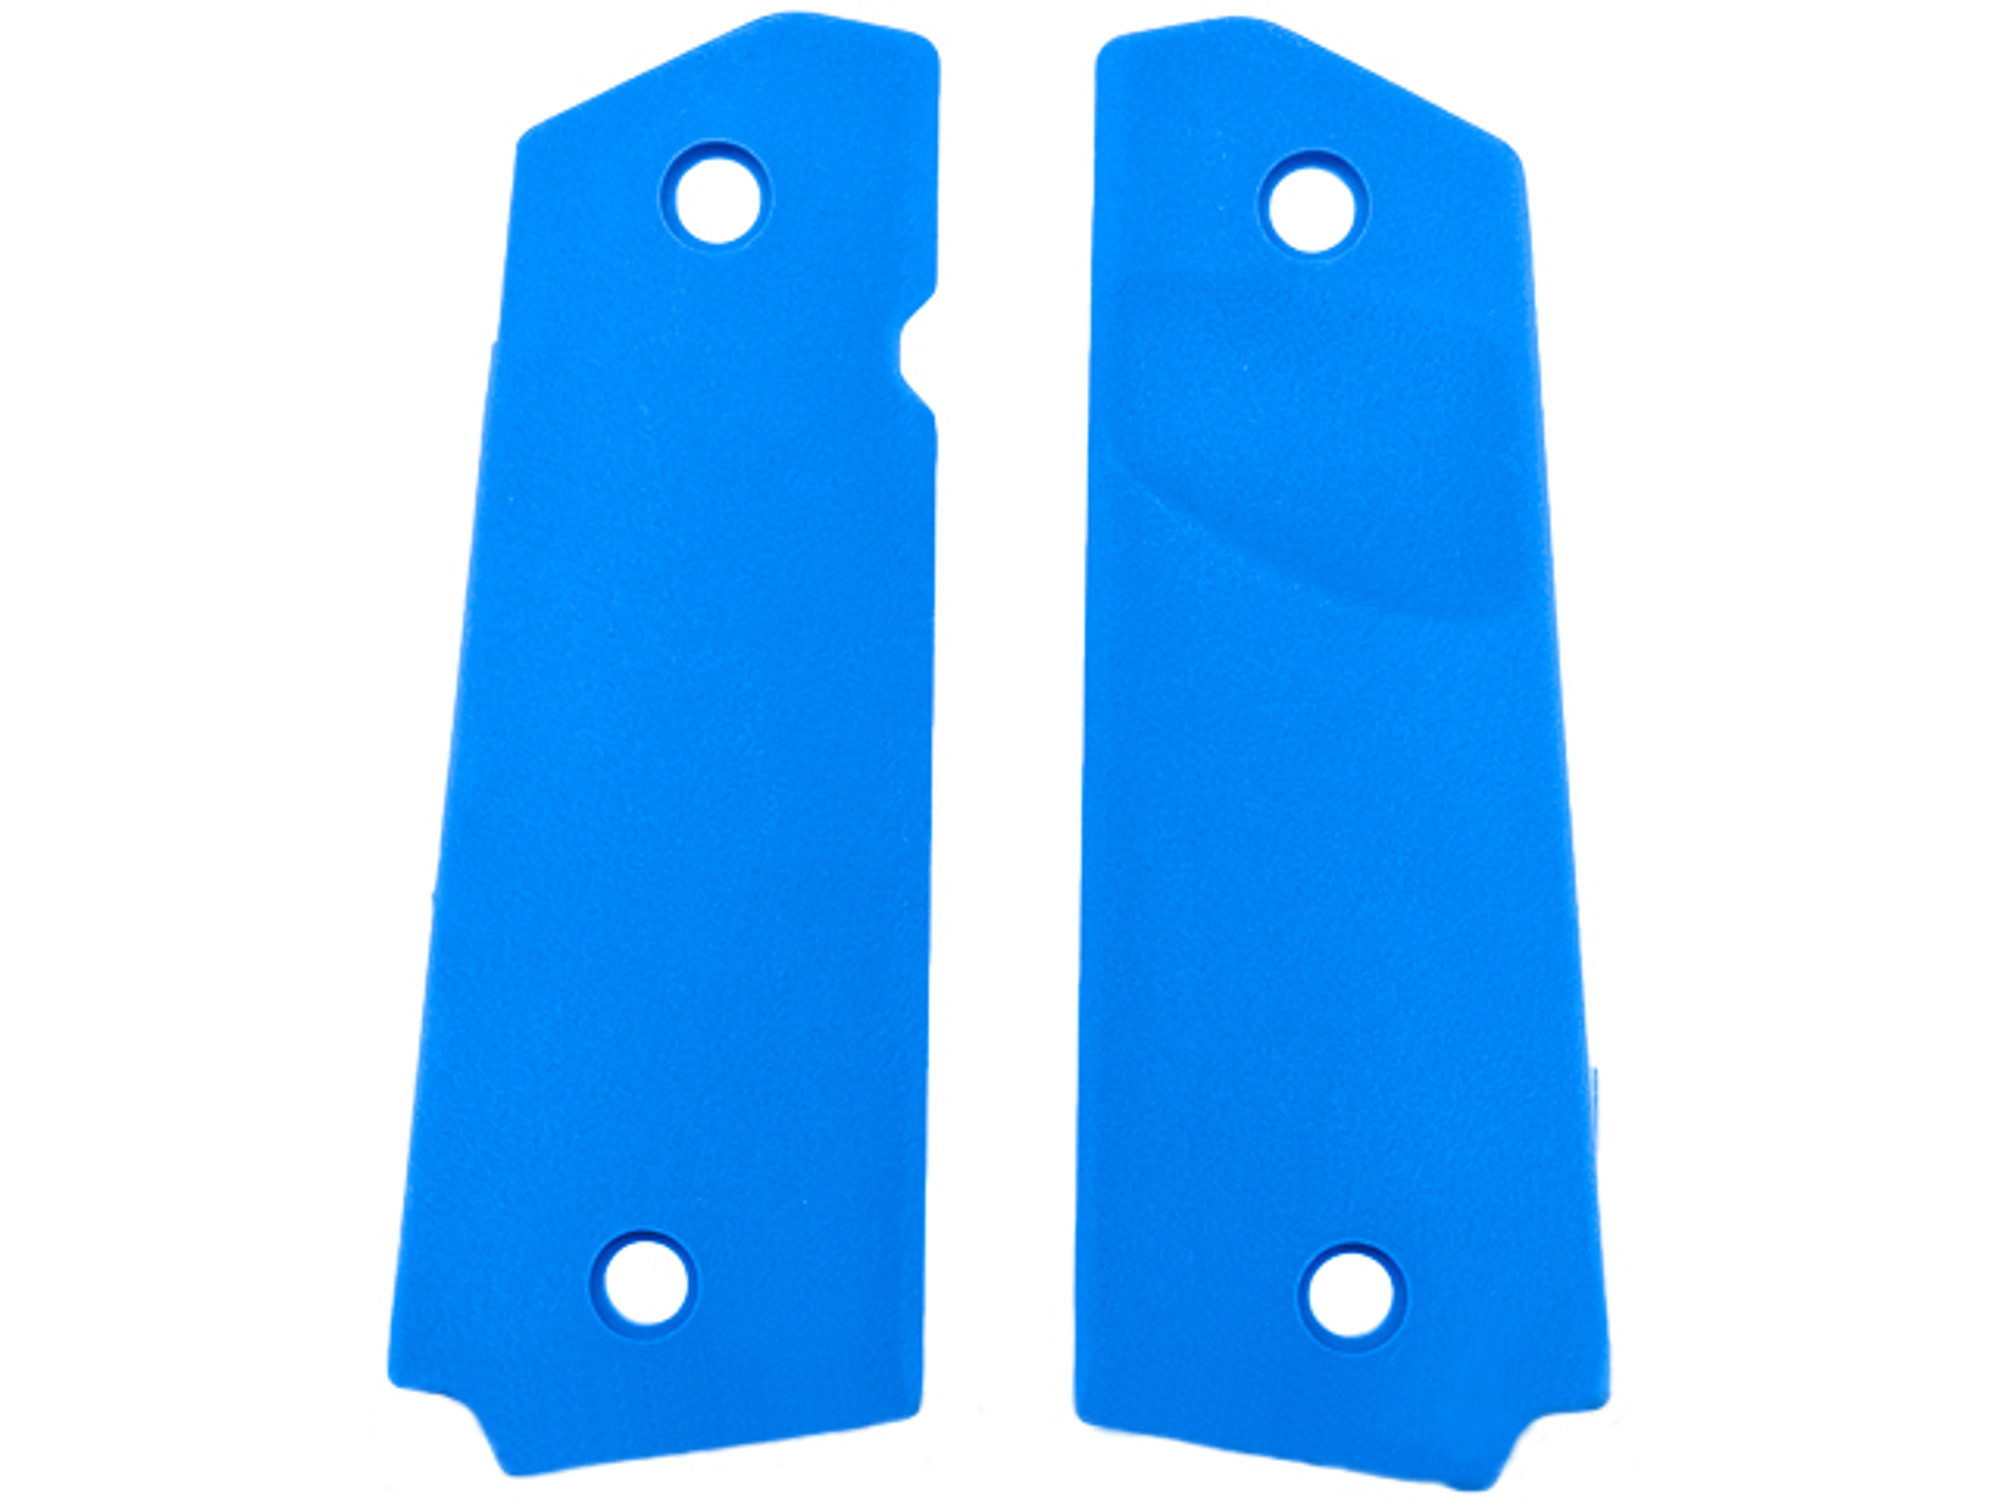 FMA Tactical Polymer Grip Panels for 1911 Airsoft GBB Pistols - Blue